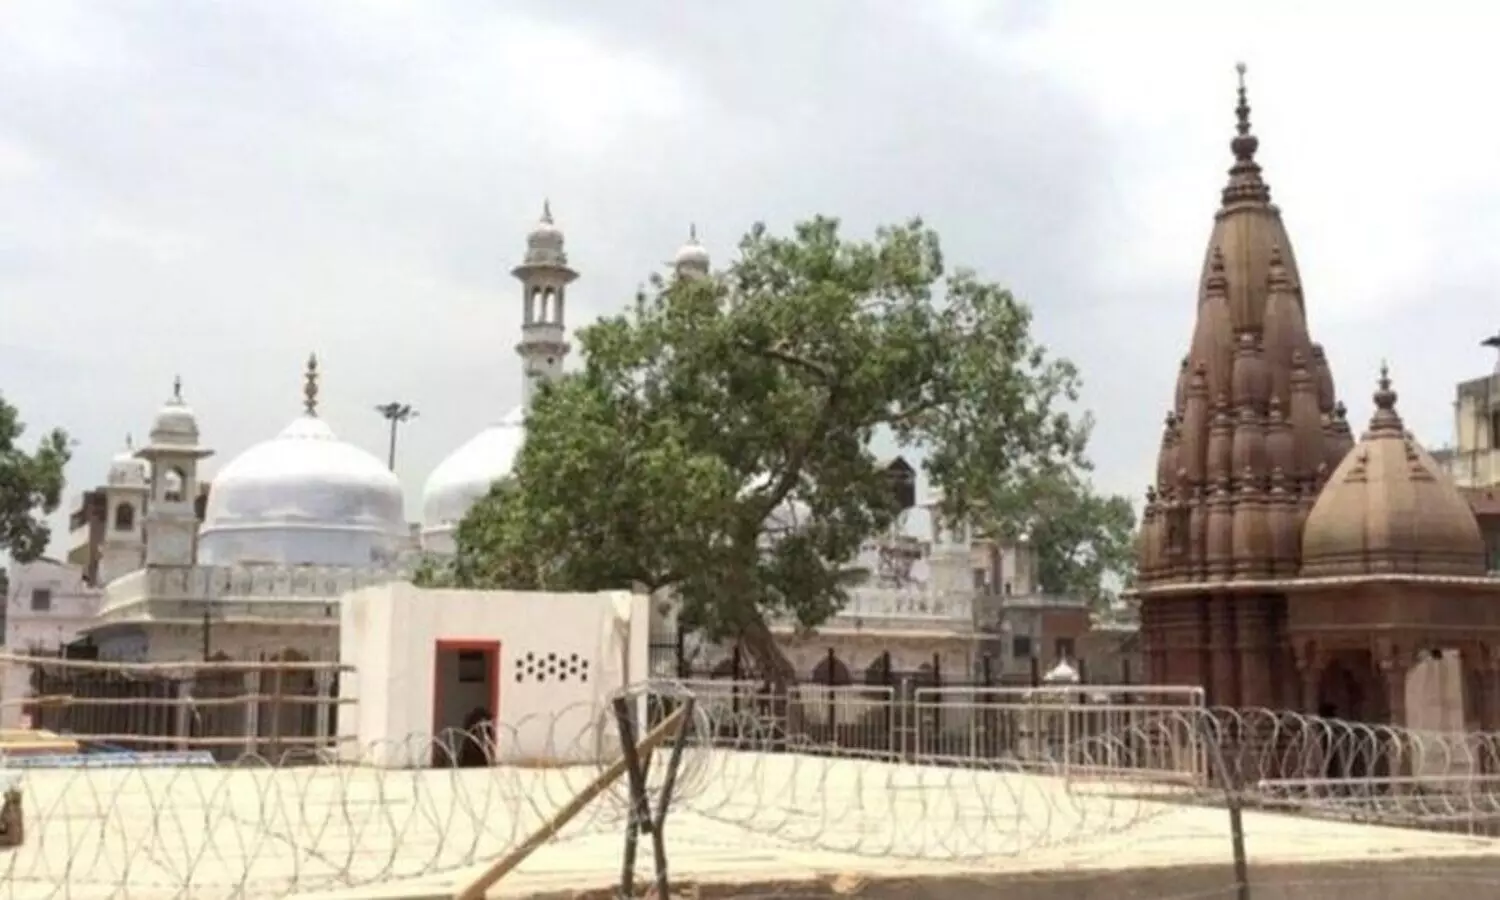 File photo of kashivishwanath temple and gyanwapi mosque, file photo taken from social media